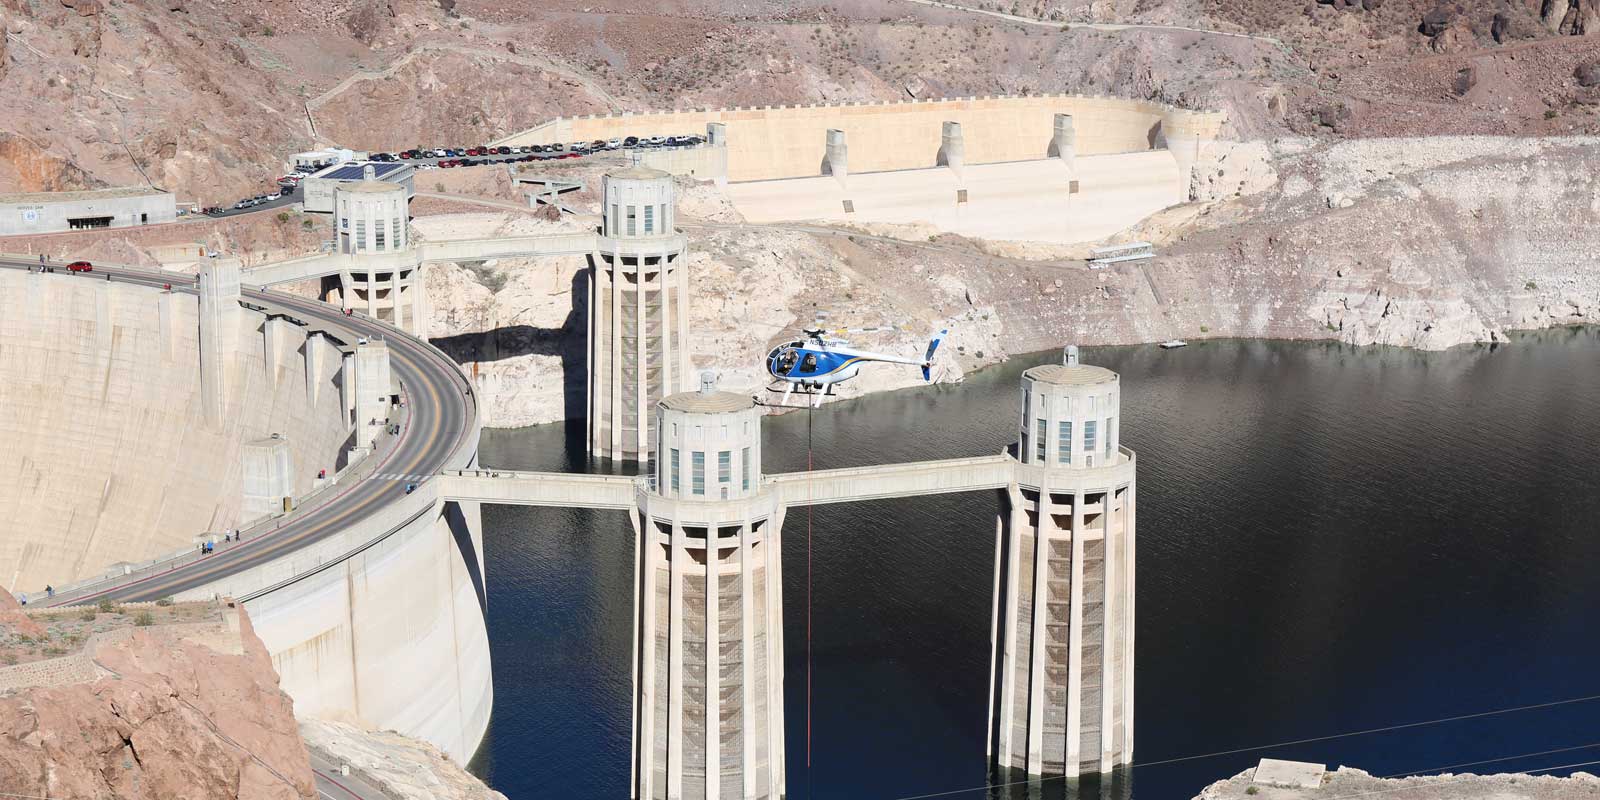 Photo of a helicopter hovering over the Hoover Dam Intake Tower Bridge.